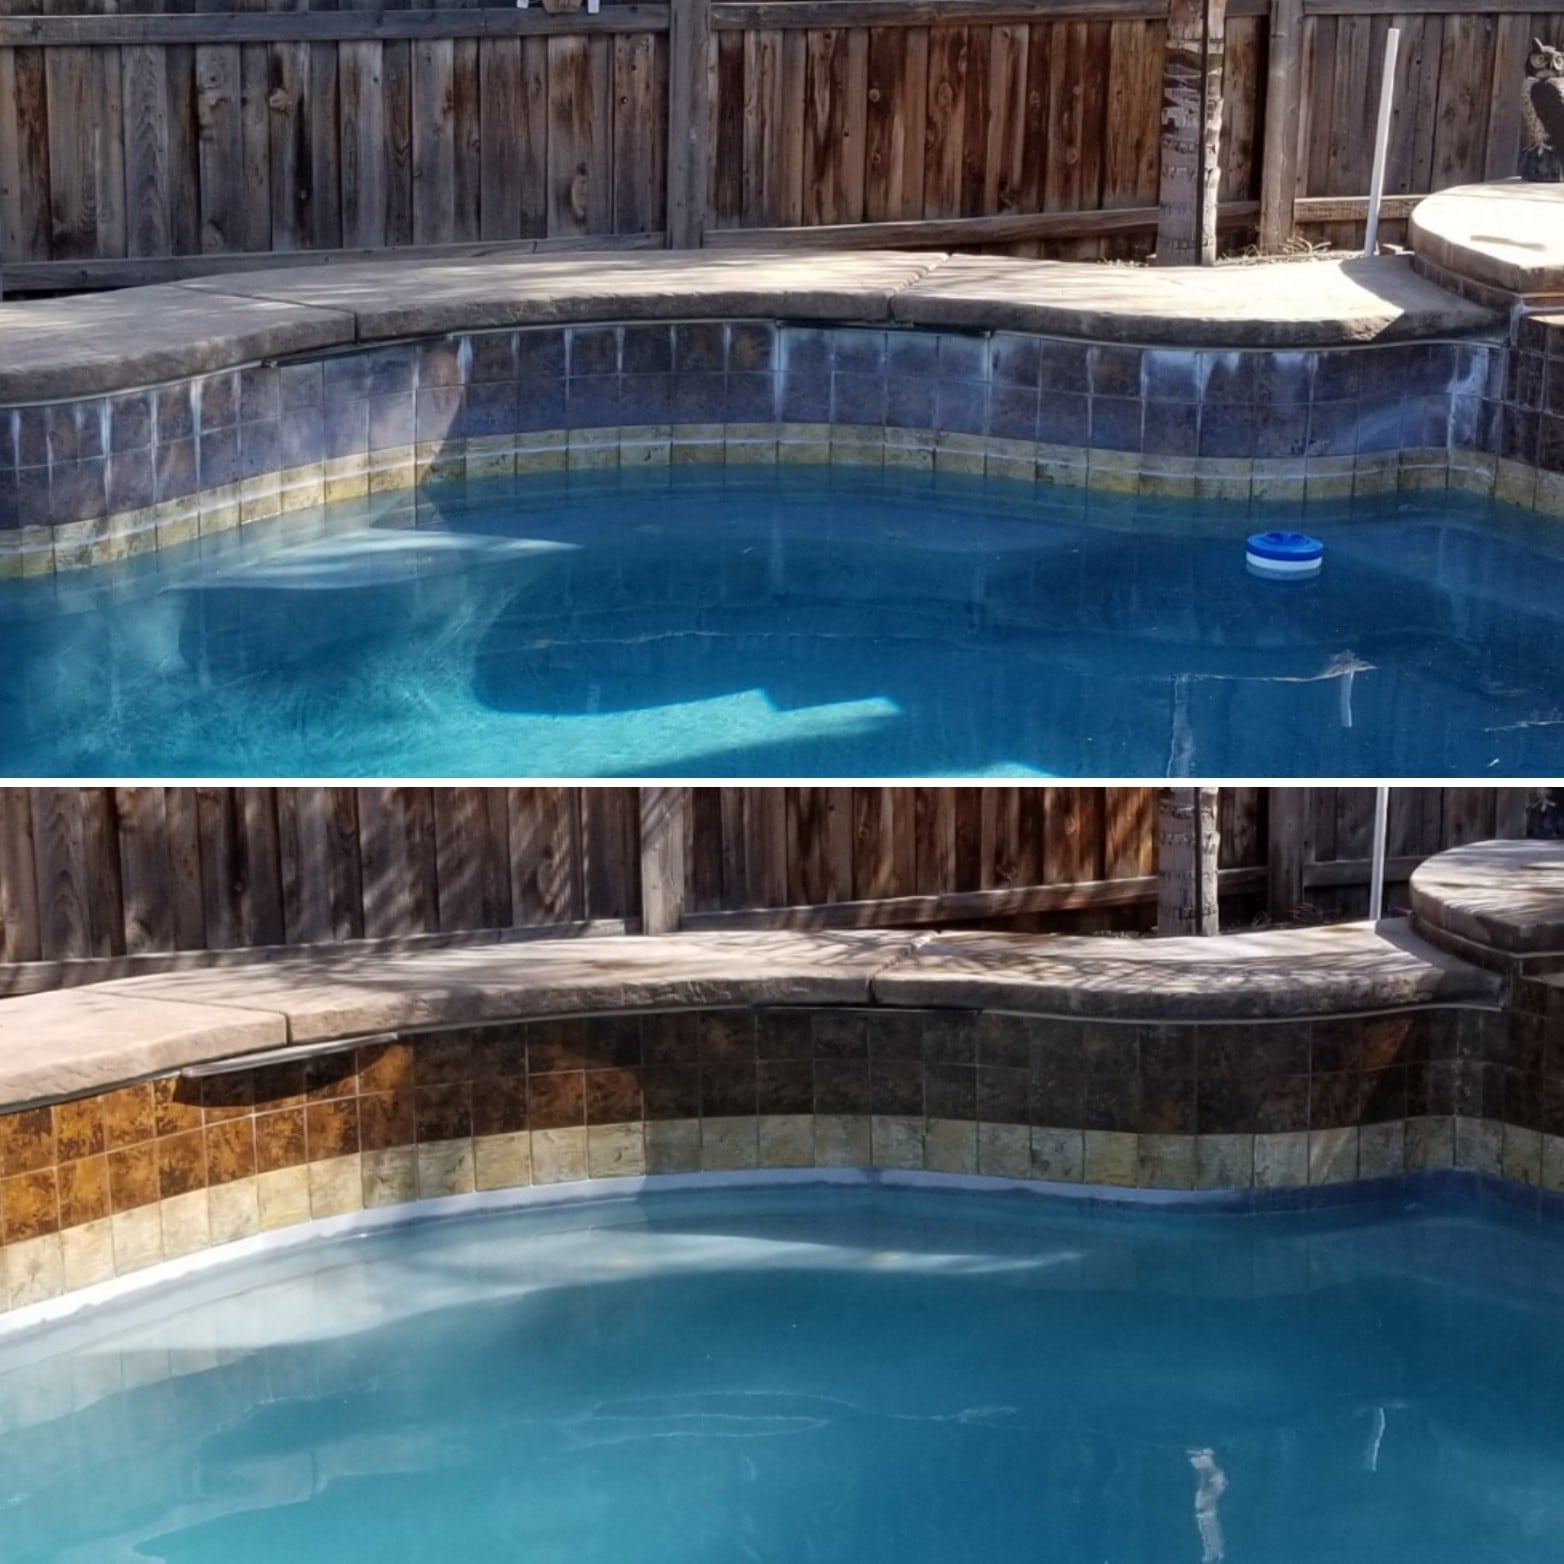 Pool Tiles Before and After